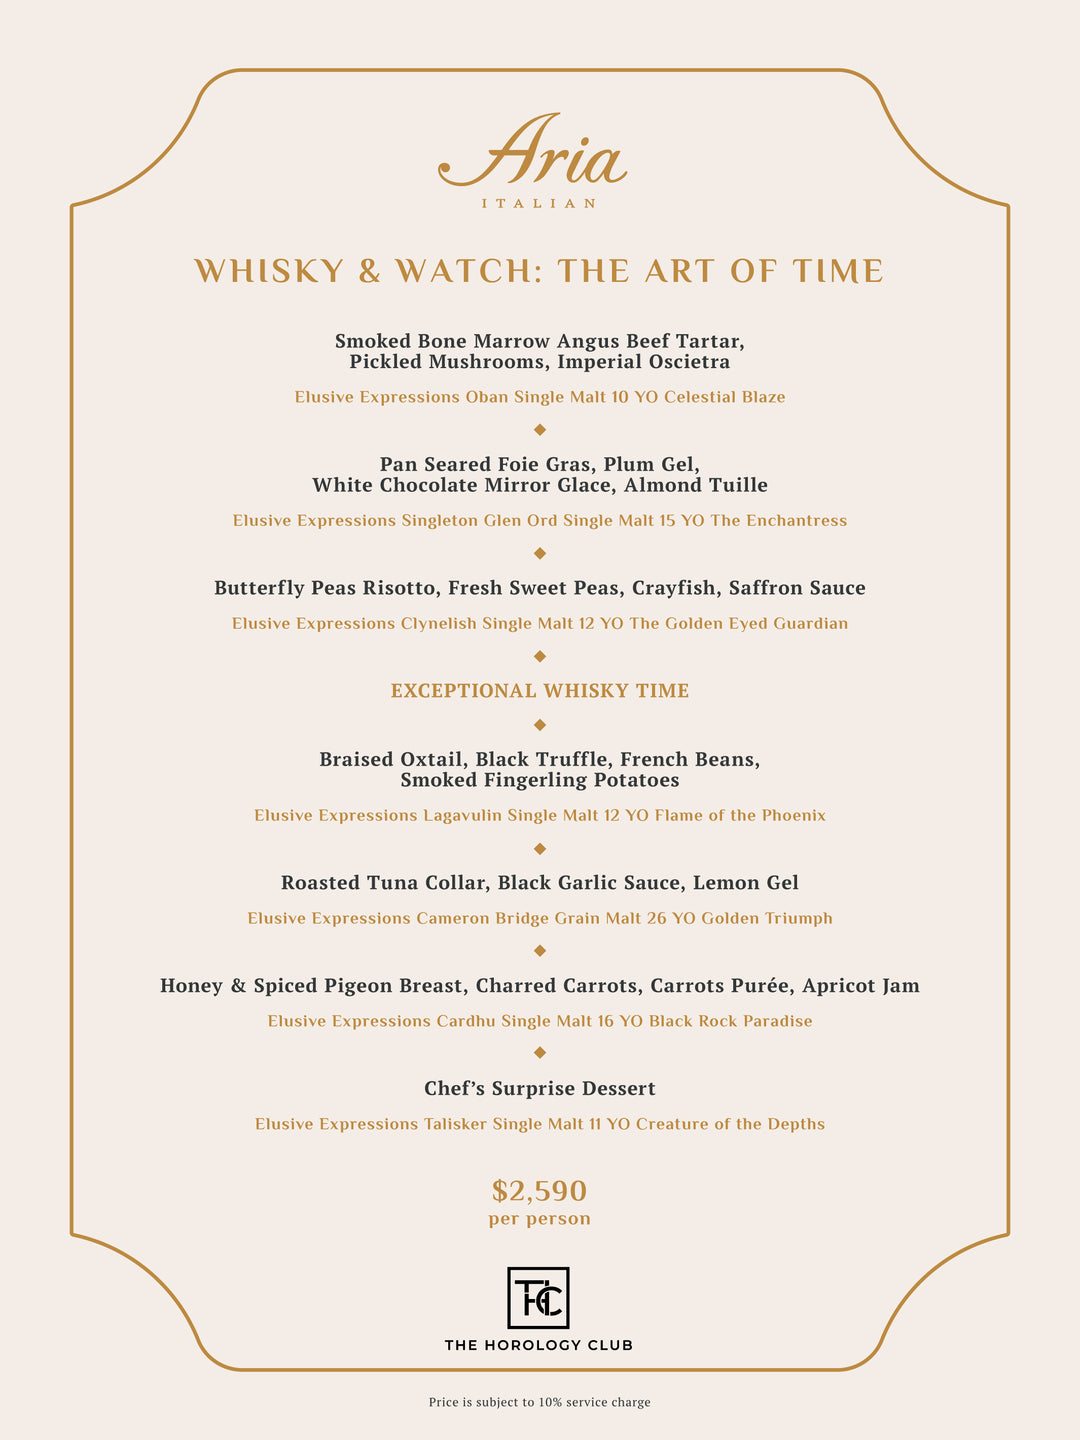 Horology Club x Diageo Whisky Release